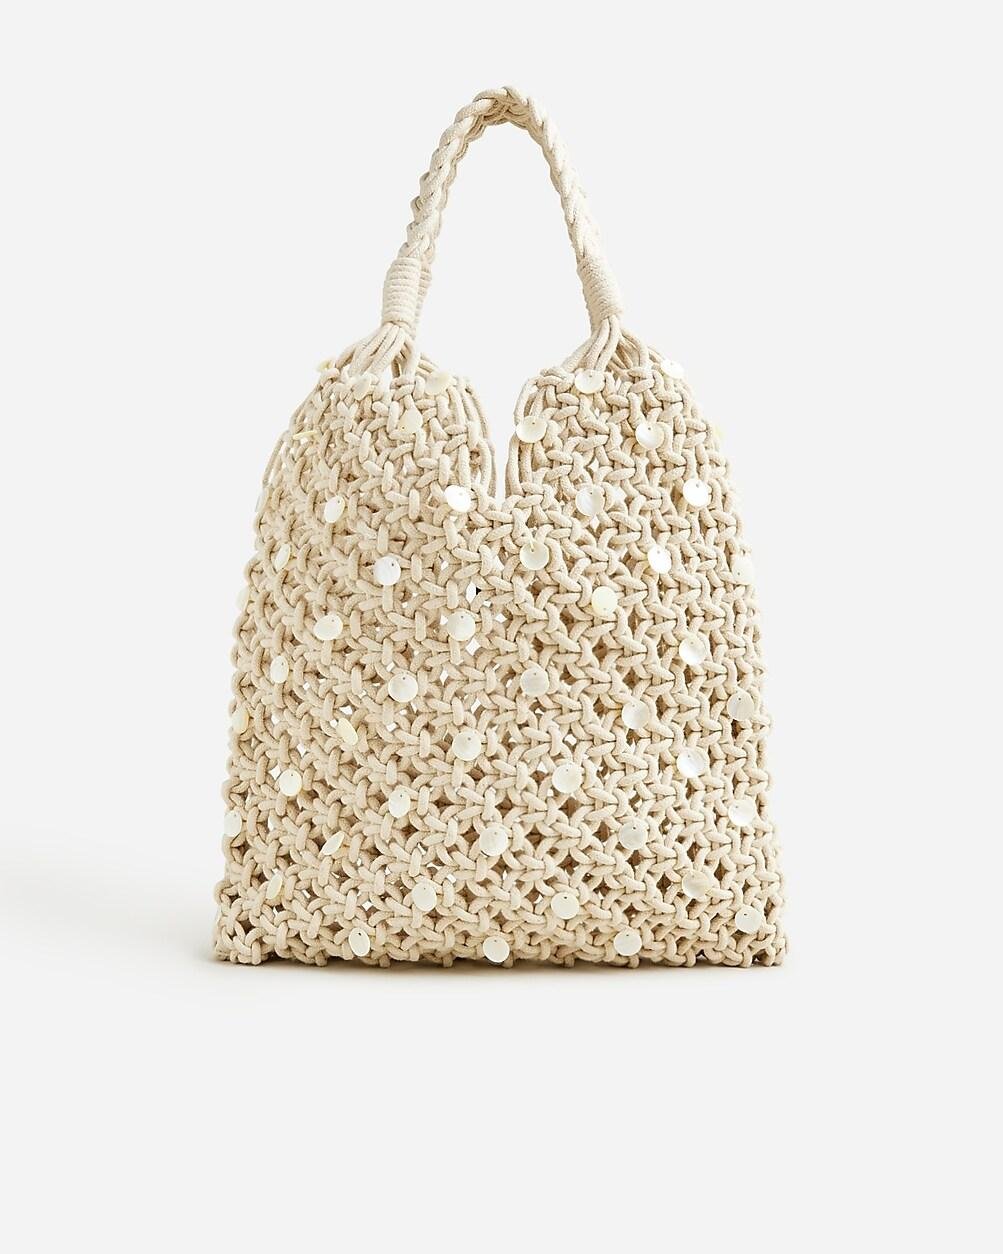 Cadiz hand-knotted rope tote with paillettes by J.CREW